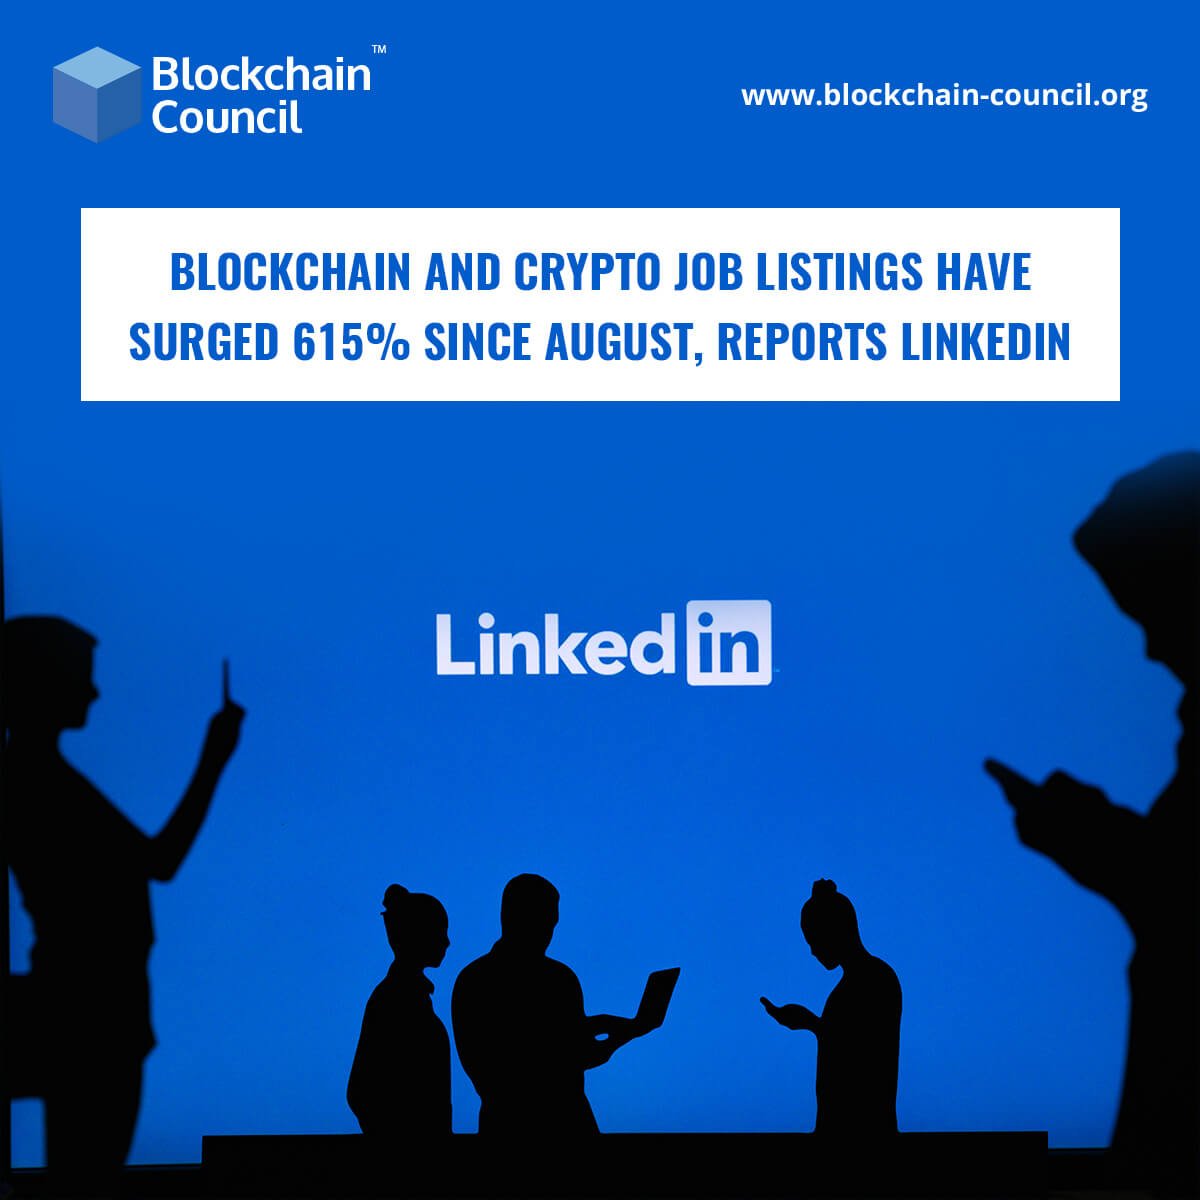 Blockchain and Crypto job listings have surged 615% since August, reports LinkedIn